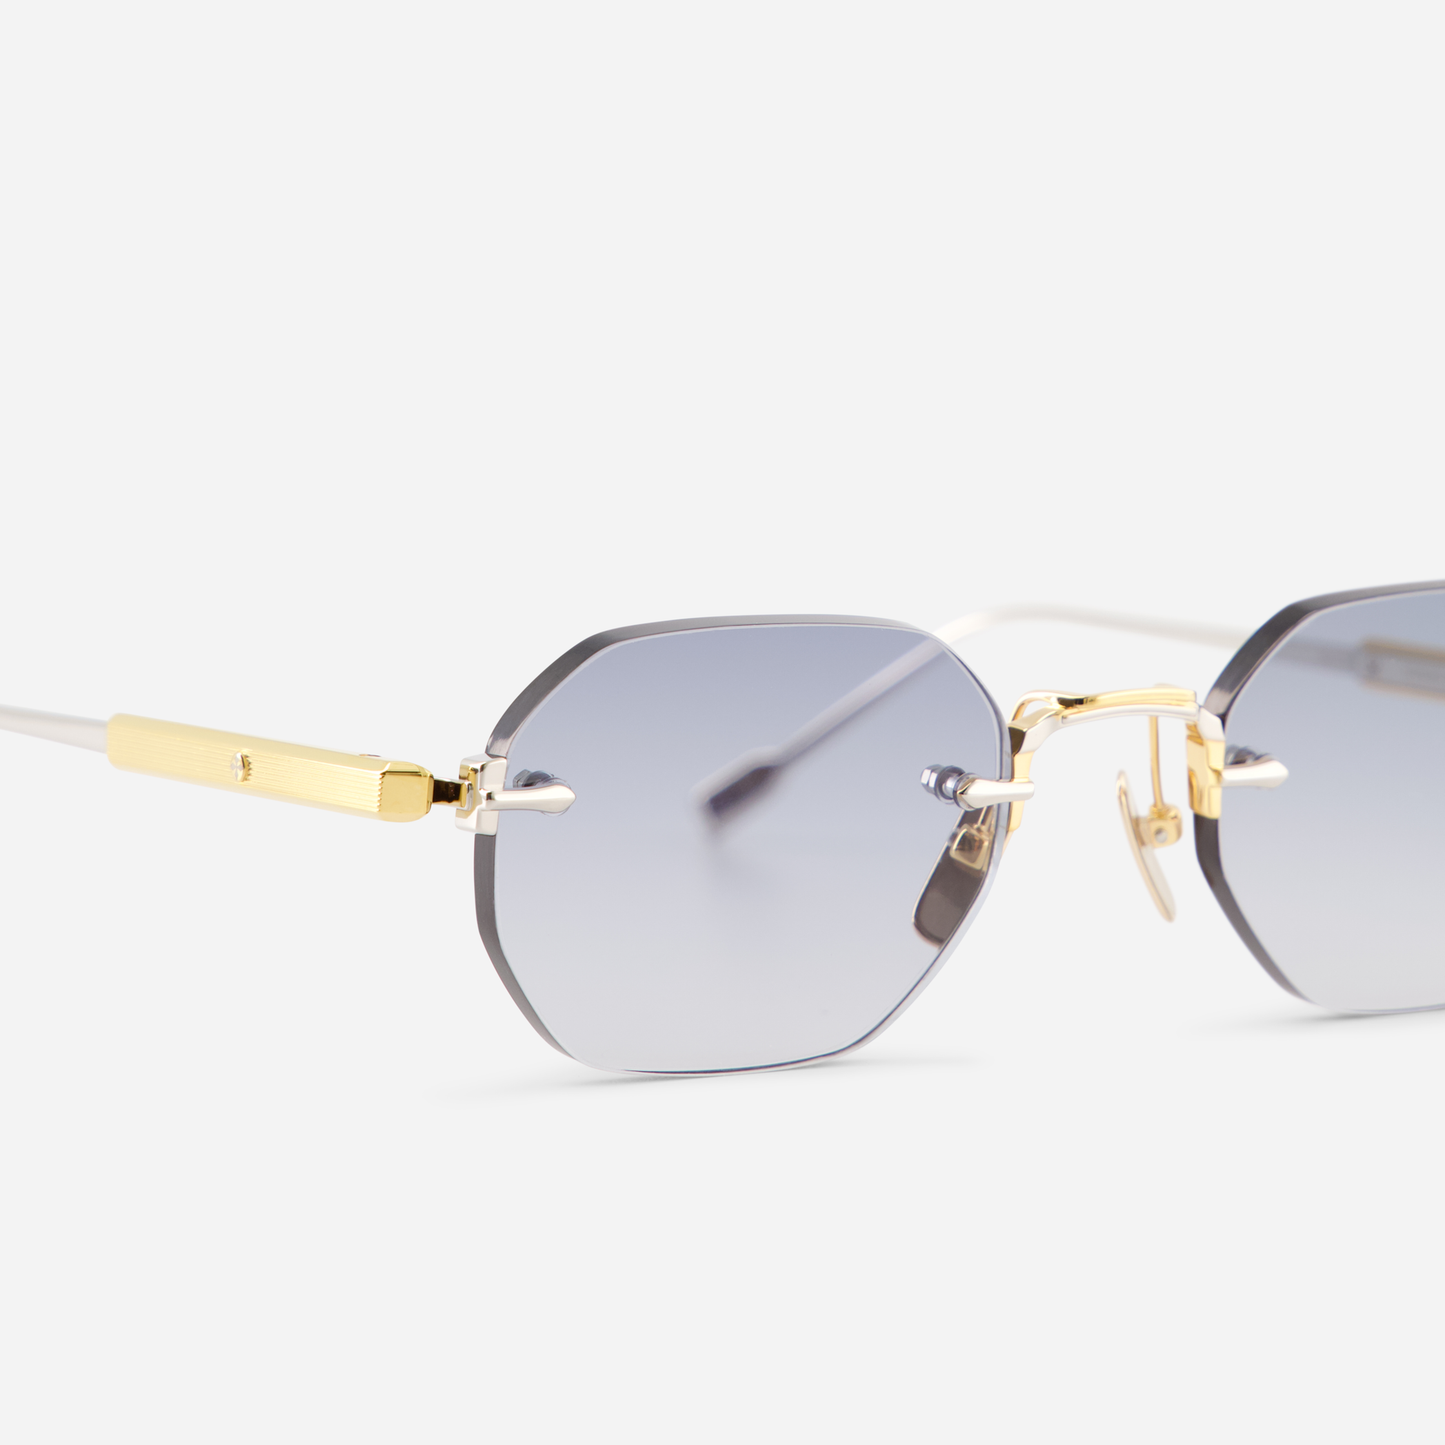 Terebellum II S703, showcasing yellow gold and platinum accents and a rounded hexagonal rimless design, perfectly complemented by captivating blue lenses.